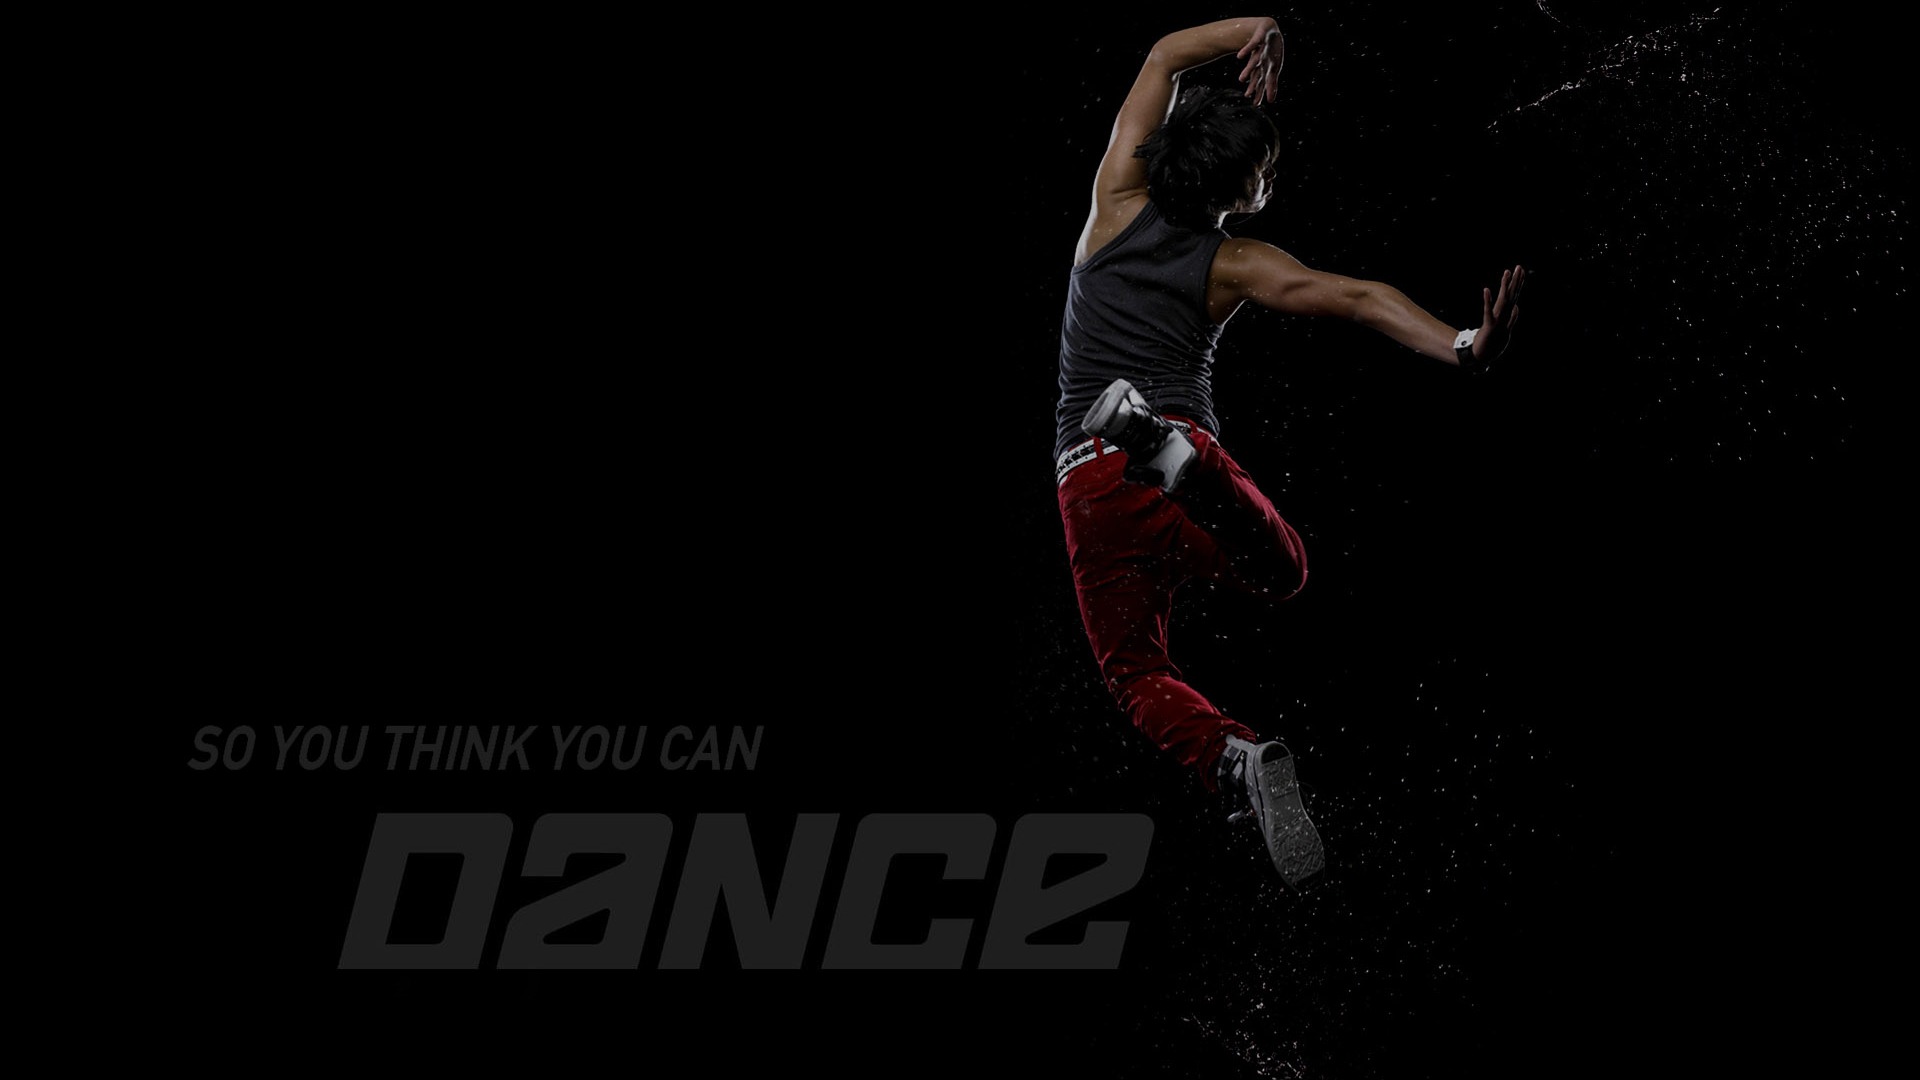 So You Think You Can Dance wallpaper (2) #12 - 1920x1080